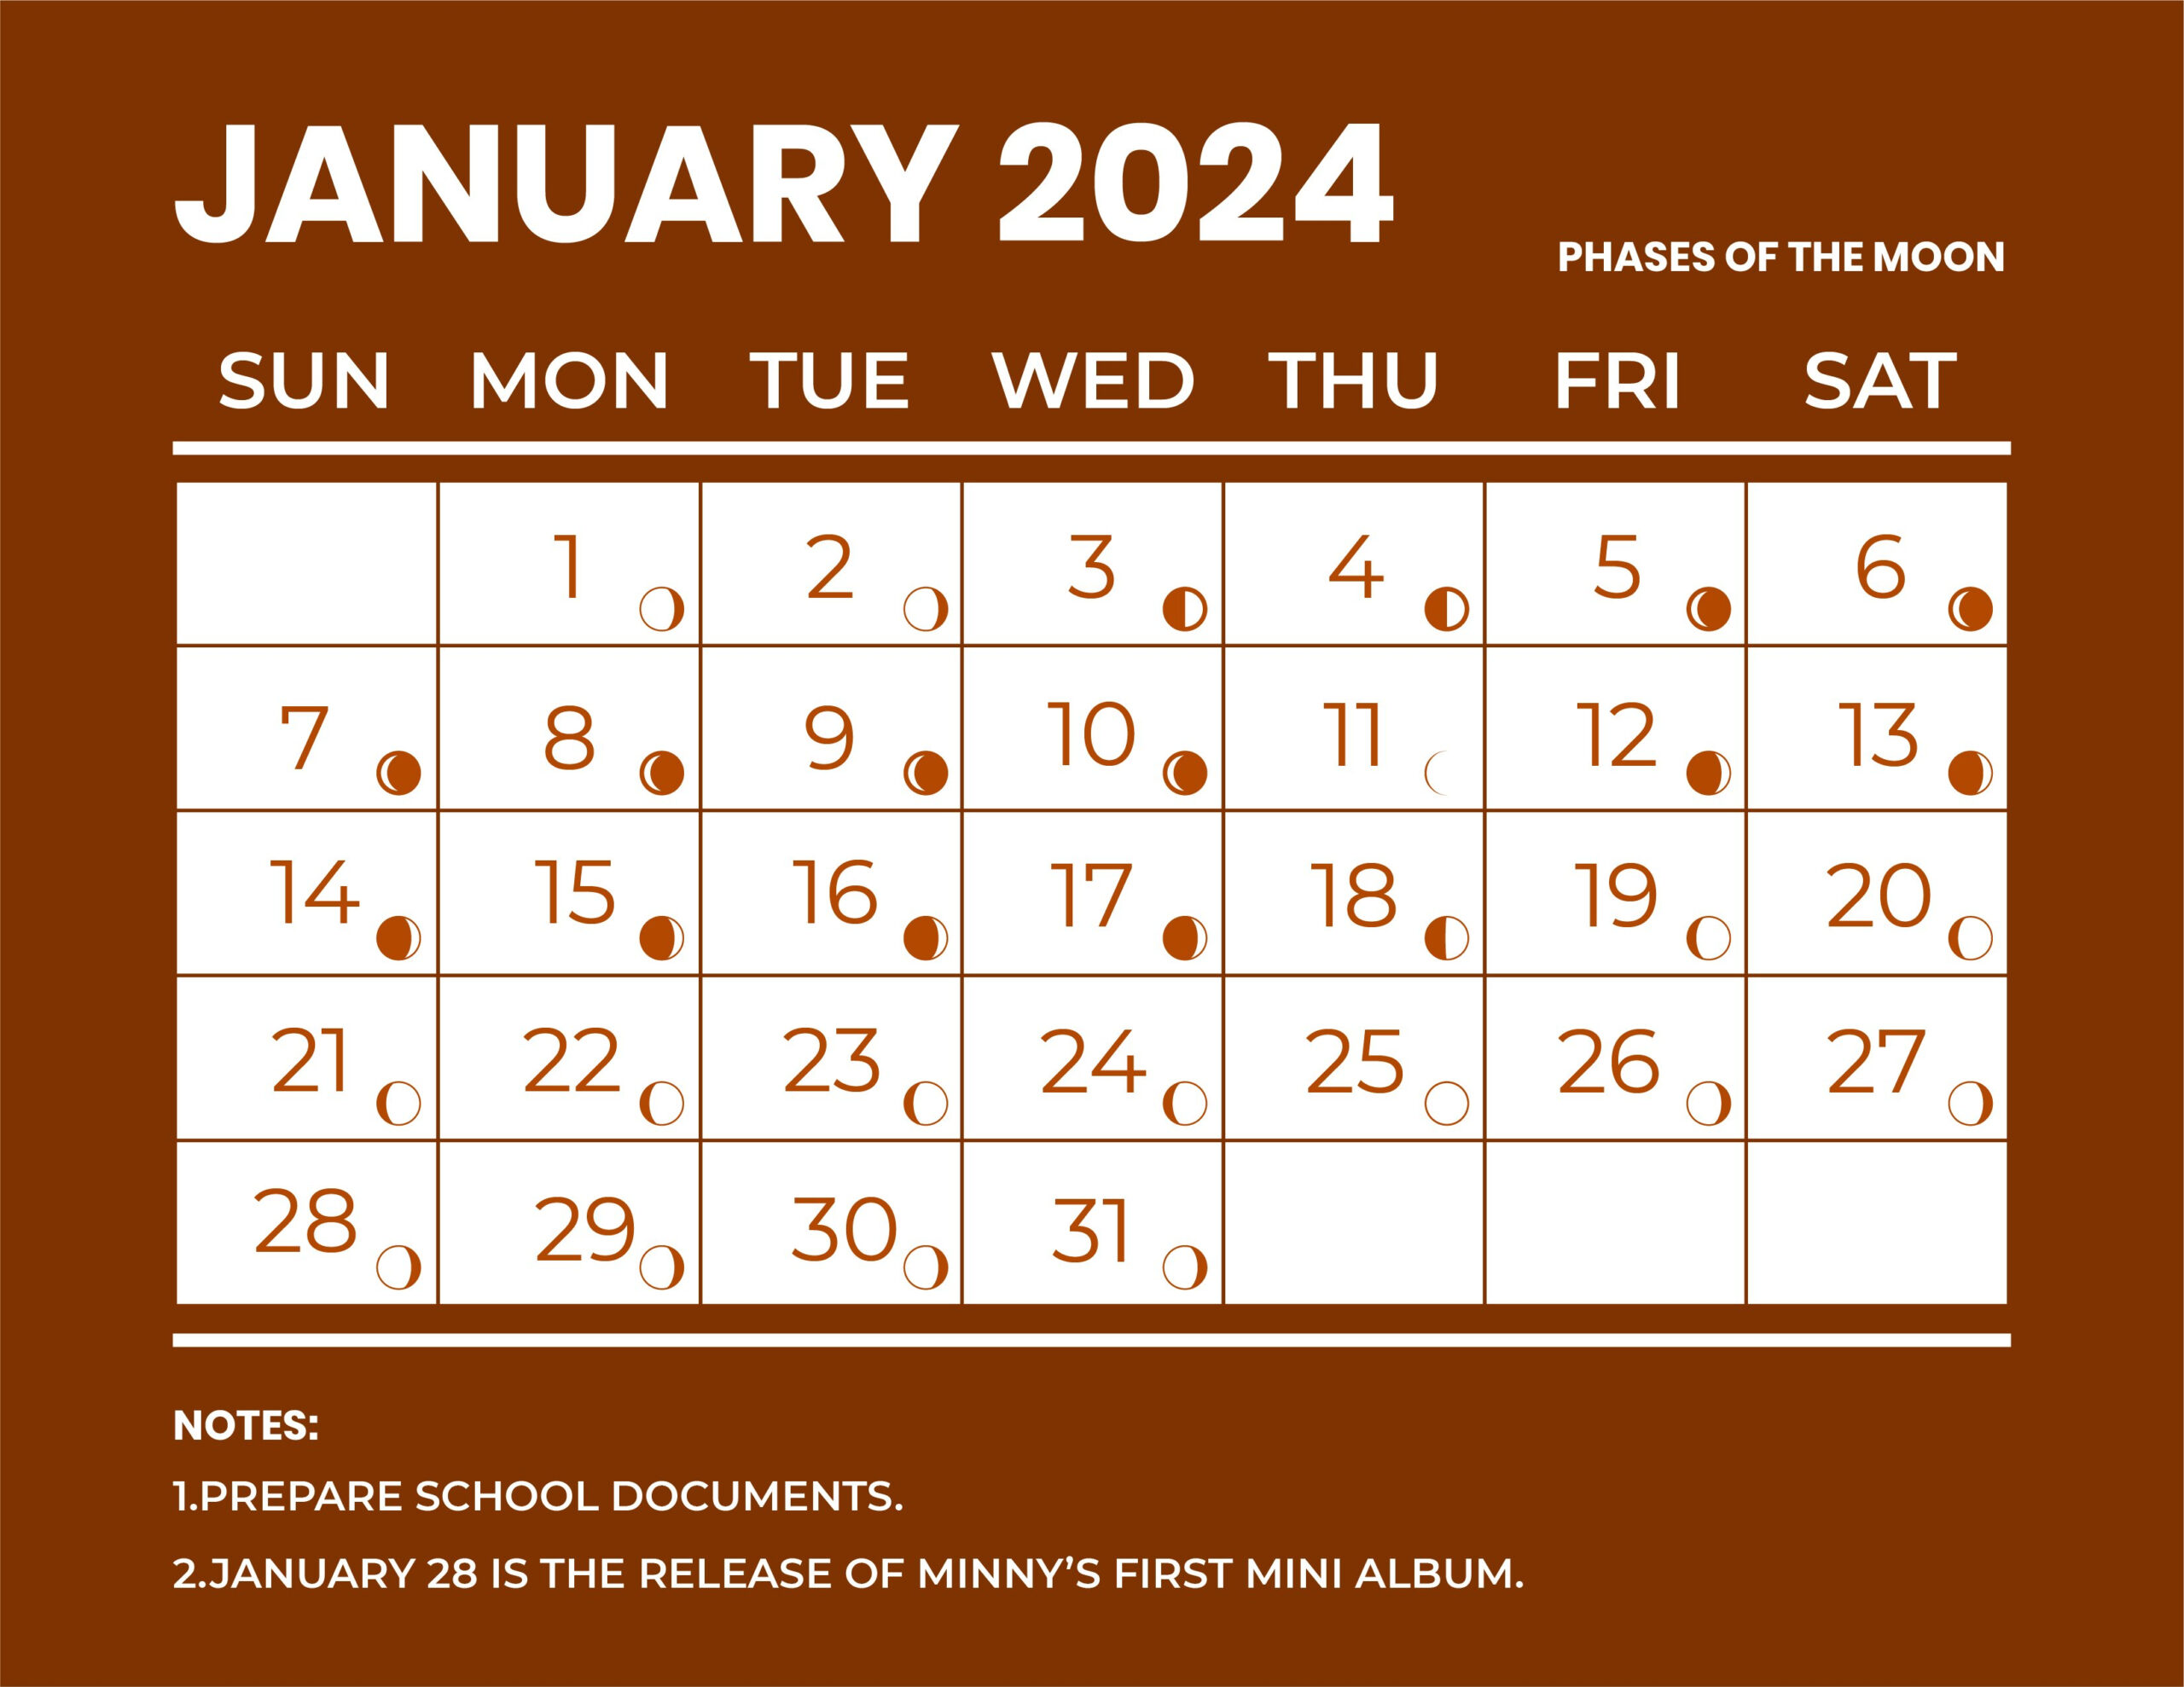 January 2024 Calendar With Moon Phases - Word, Illustrator, Eps for Printable Calendar 2024 With Moon Phases